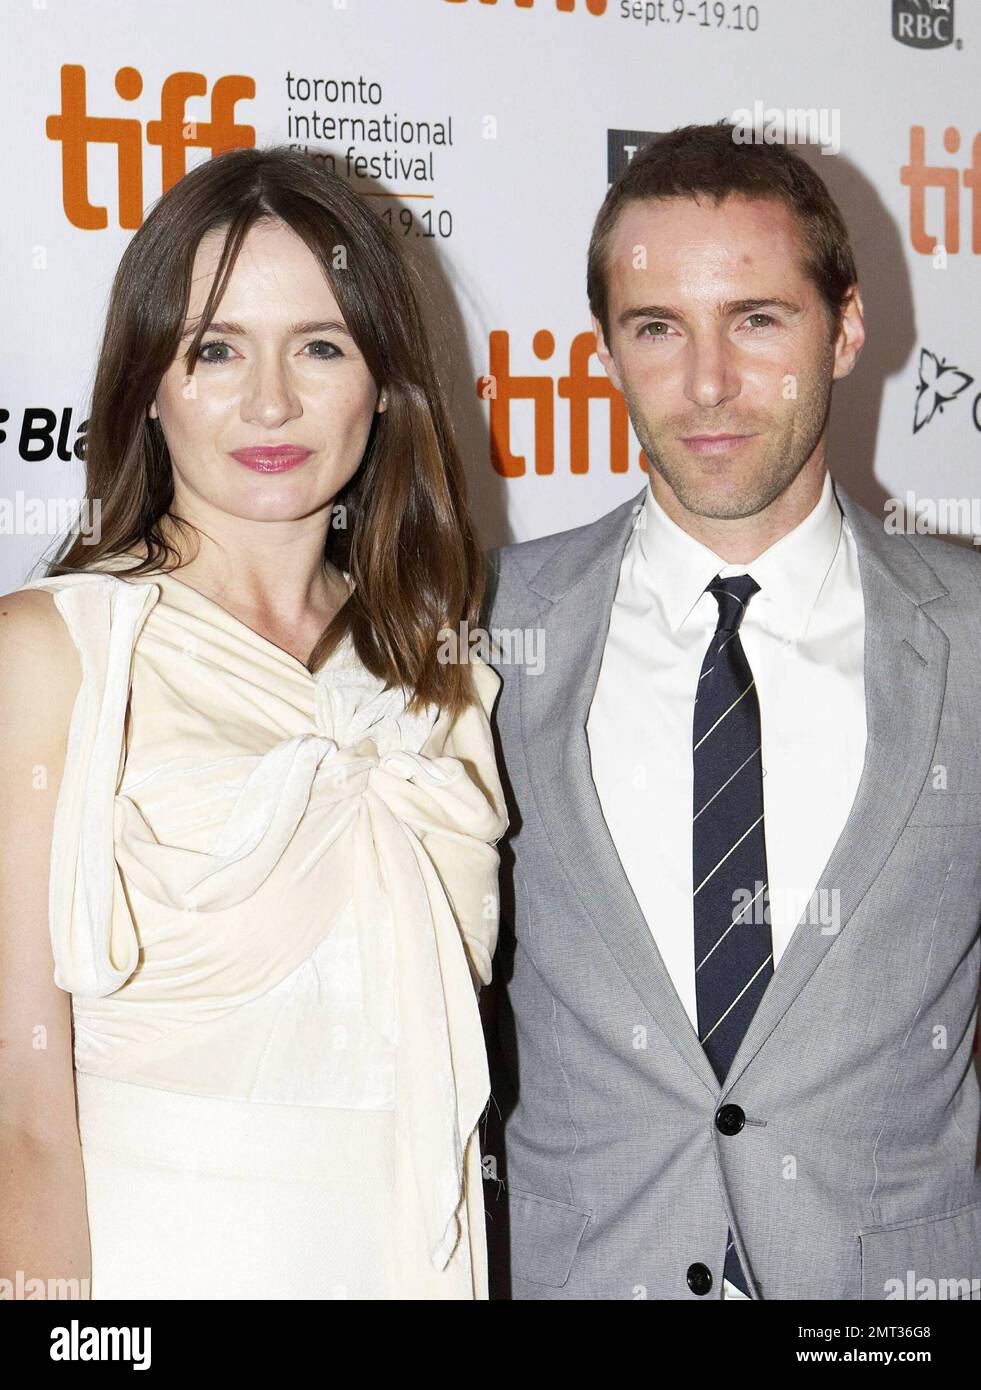 Actor Alessandro Nivola and wife, actress Emily Mortimer, arrive at the red carpet premiere of "Janie Jones" held at Roy Thomson Hall during the 35th Toronto International Film Festival. Toronto, ON. 09/17/10. Stock Photo